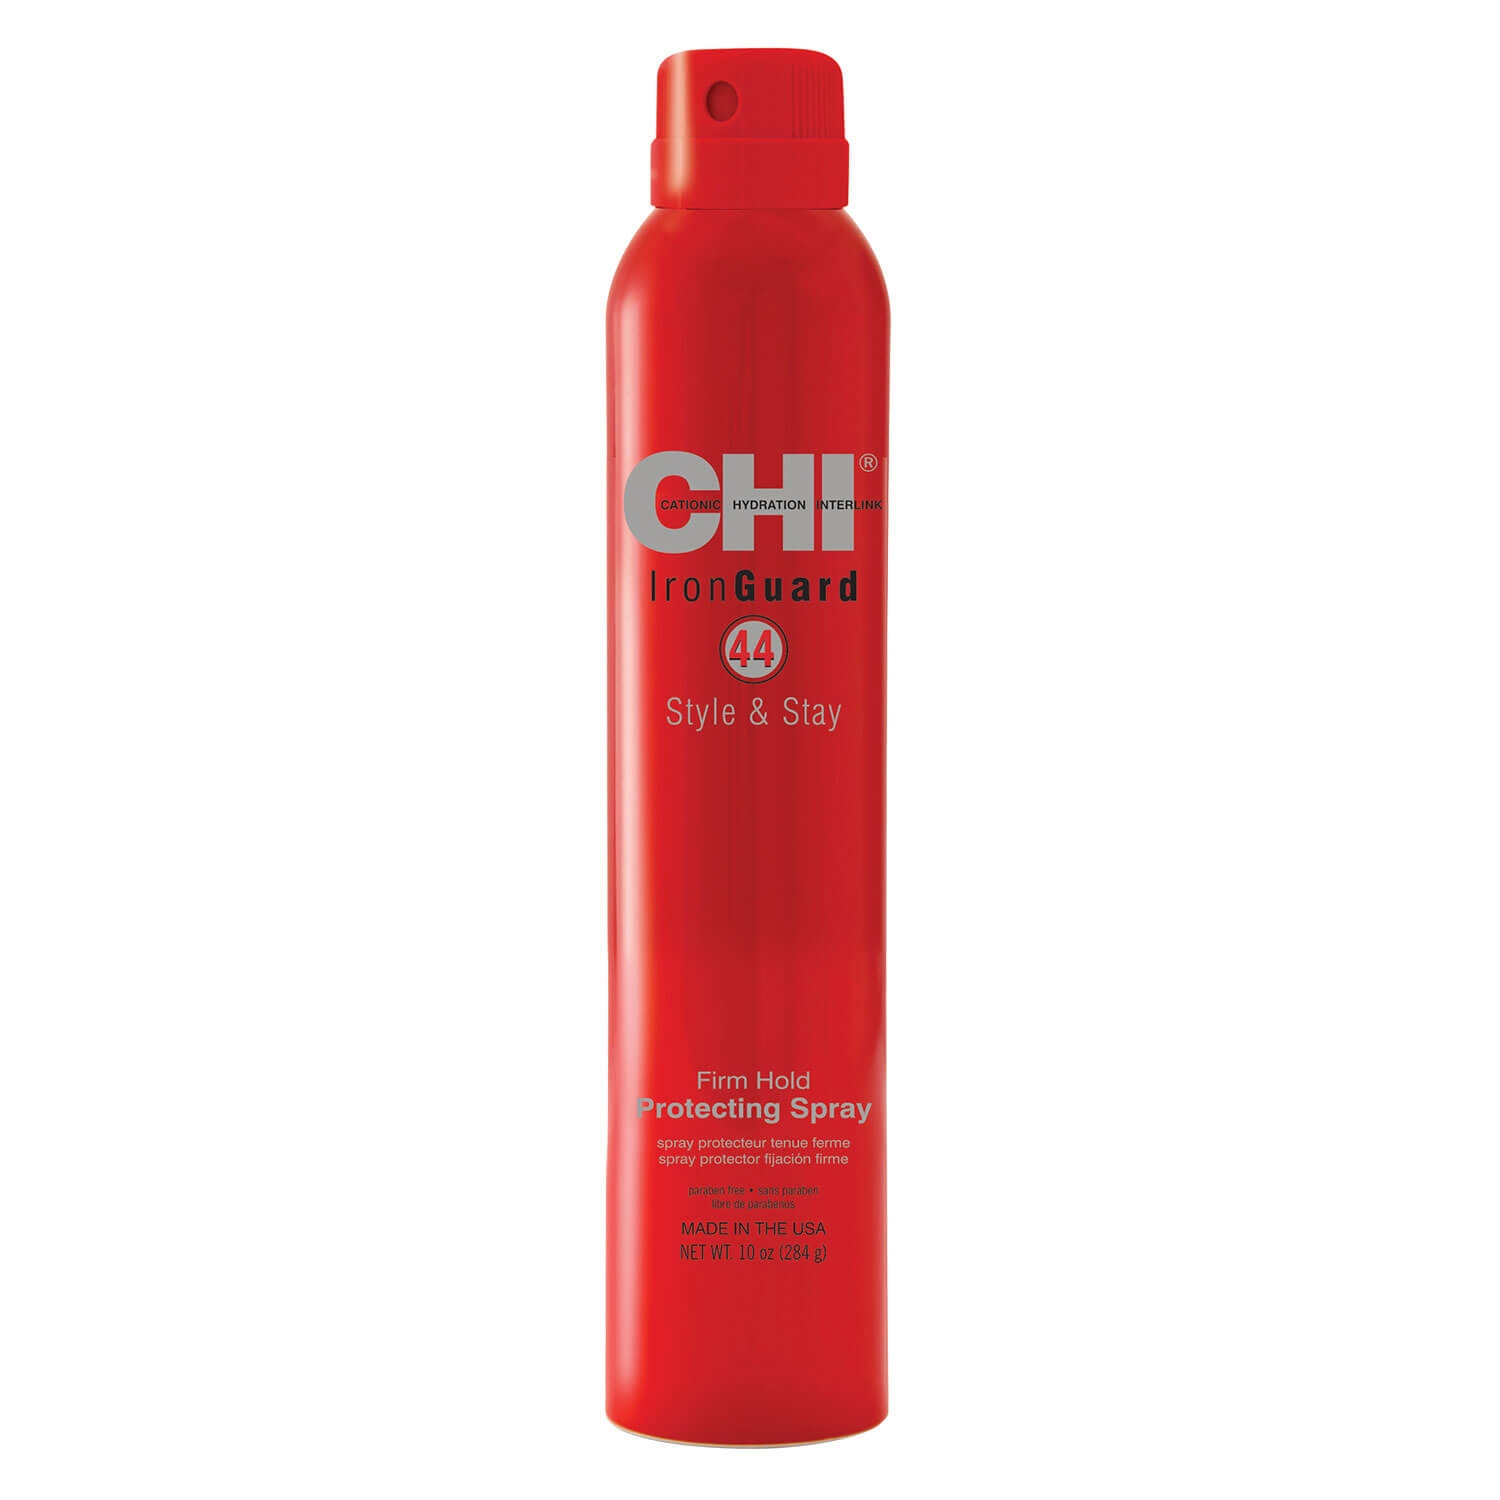 Produktbild von CHI 44 Iron Guard - Style & Stay Firm Hold Protecting Spray